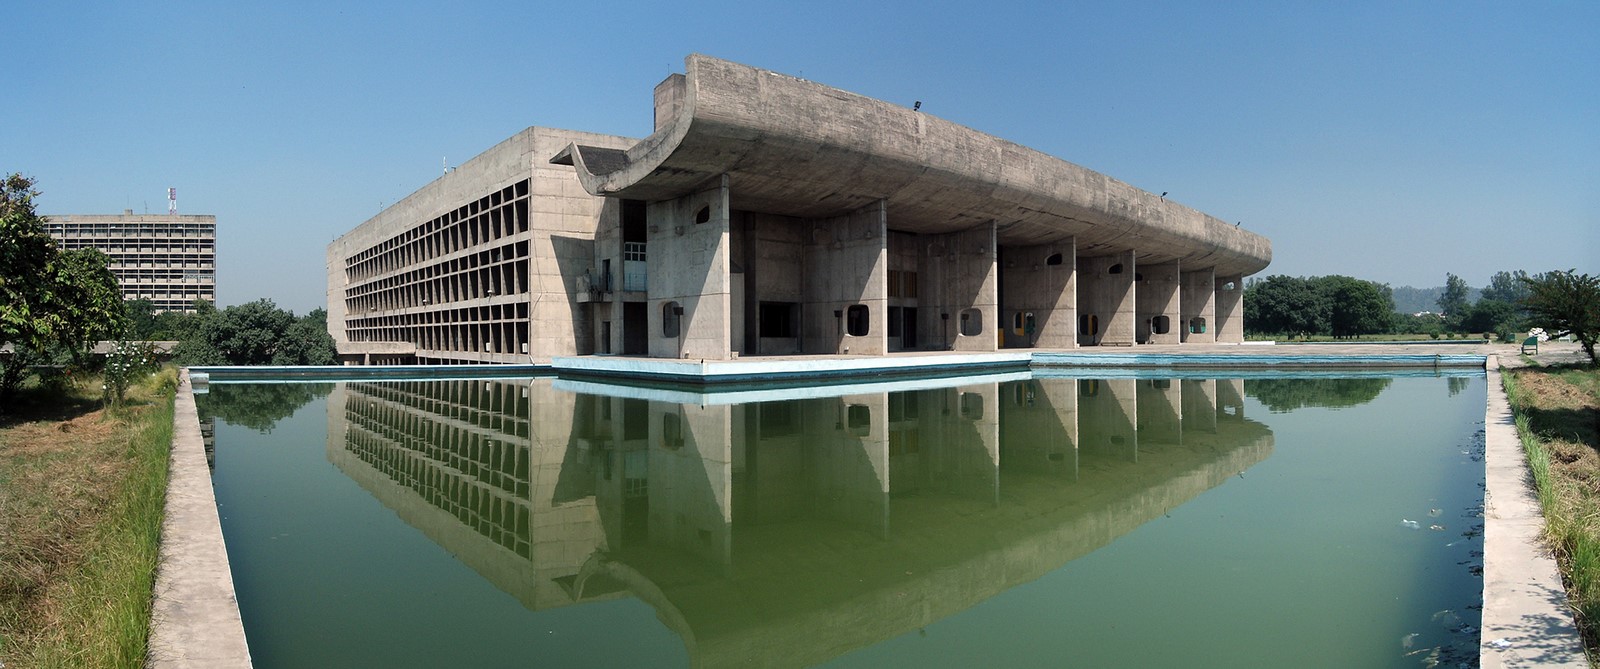 Why Kala Academy by Charles Correa should be considered as architectural heritage - Sheet2